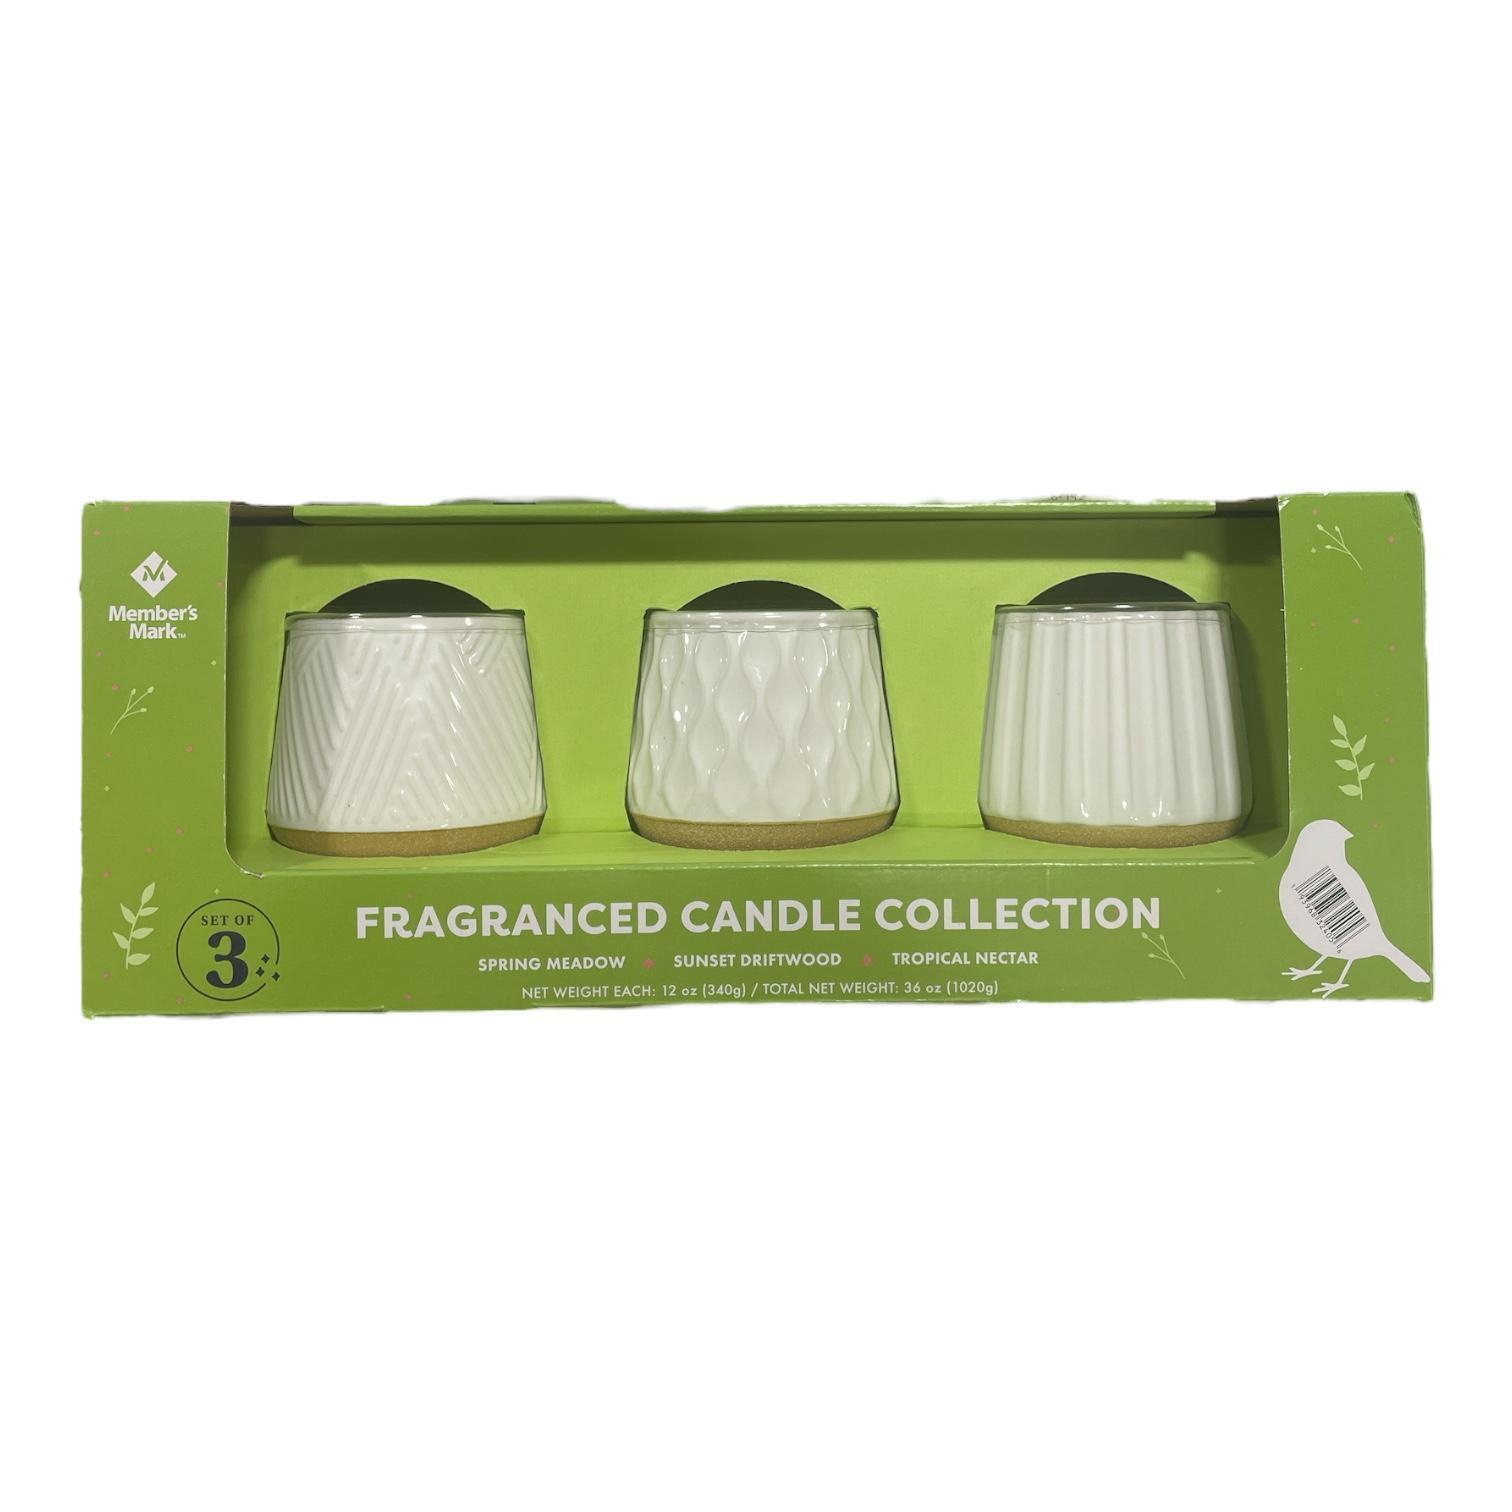 Member's Mark Unique Scented Soy Wax Candle Collection, 3 Pack